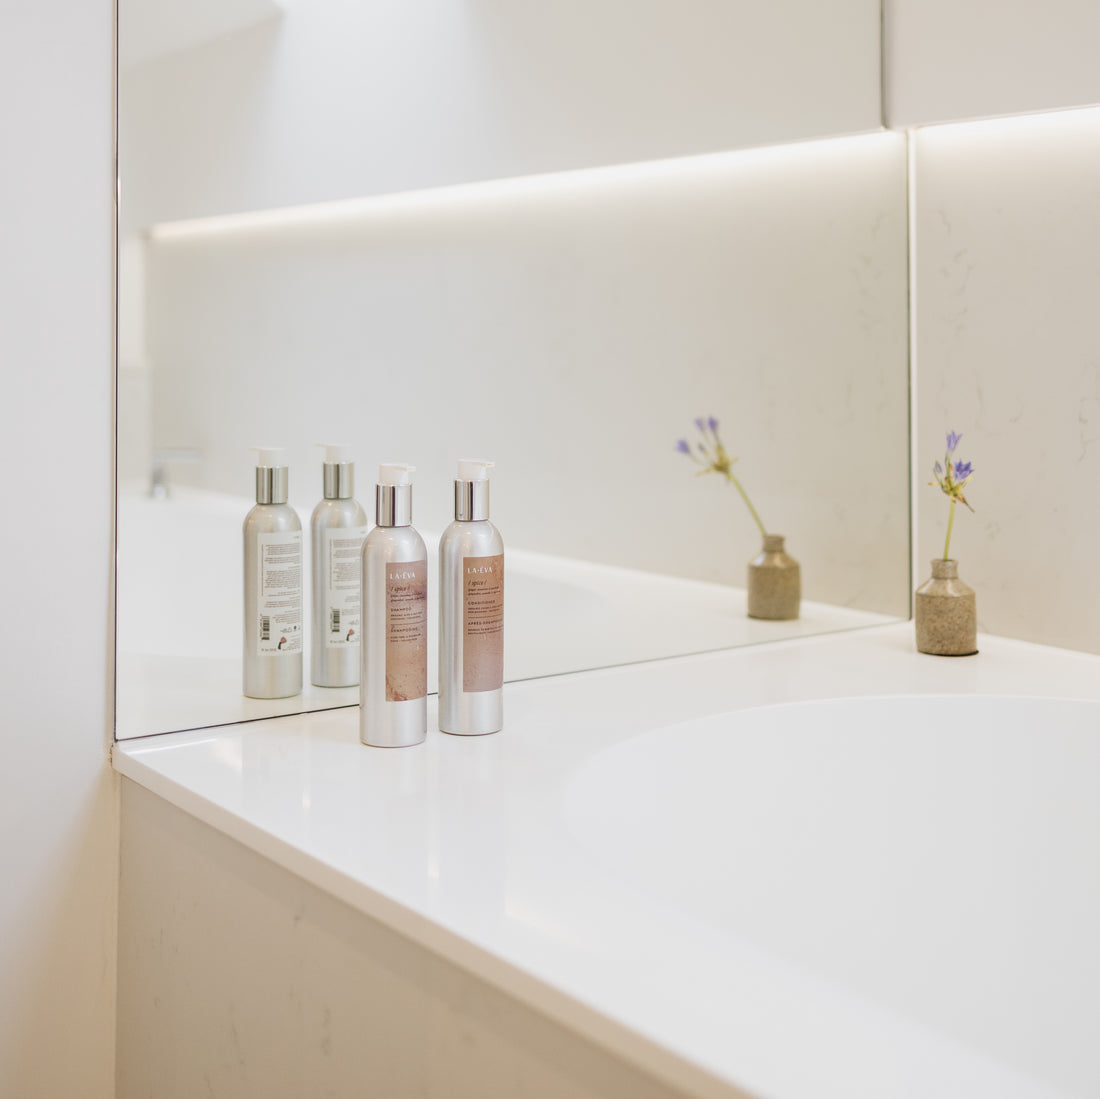 two 200ml aluminium bottles of La-Eva Spice shampoo and conditioner photographed in the hotel bathroom of the Oxford Collection